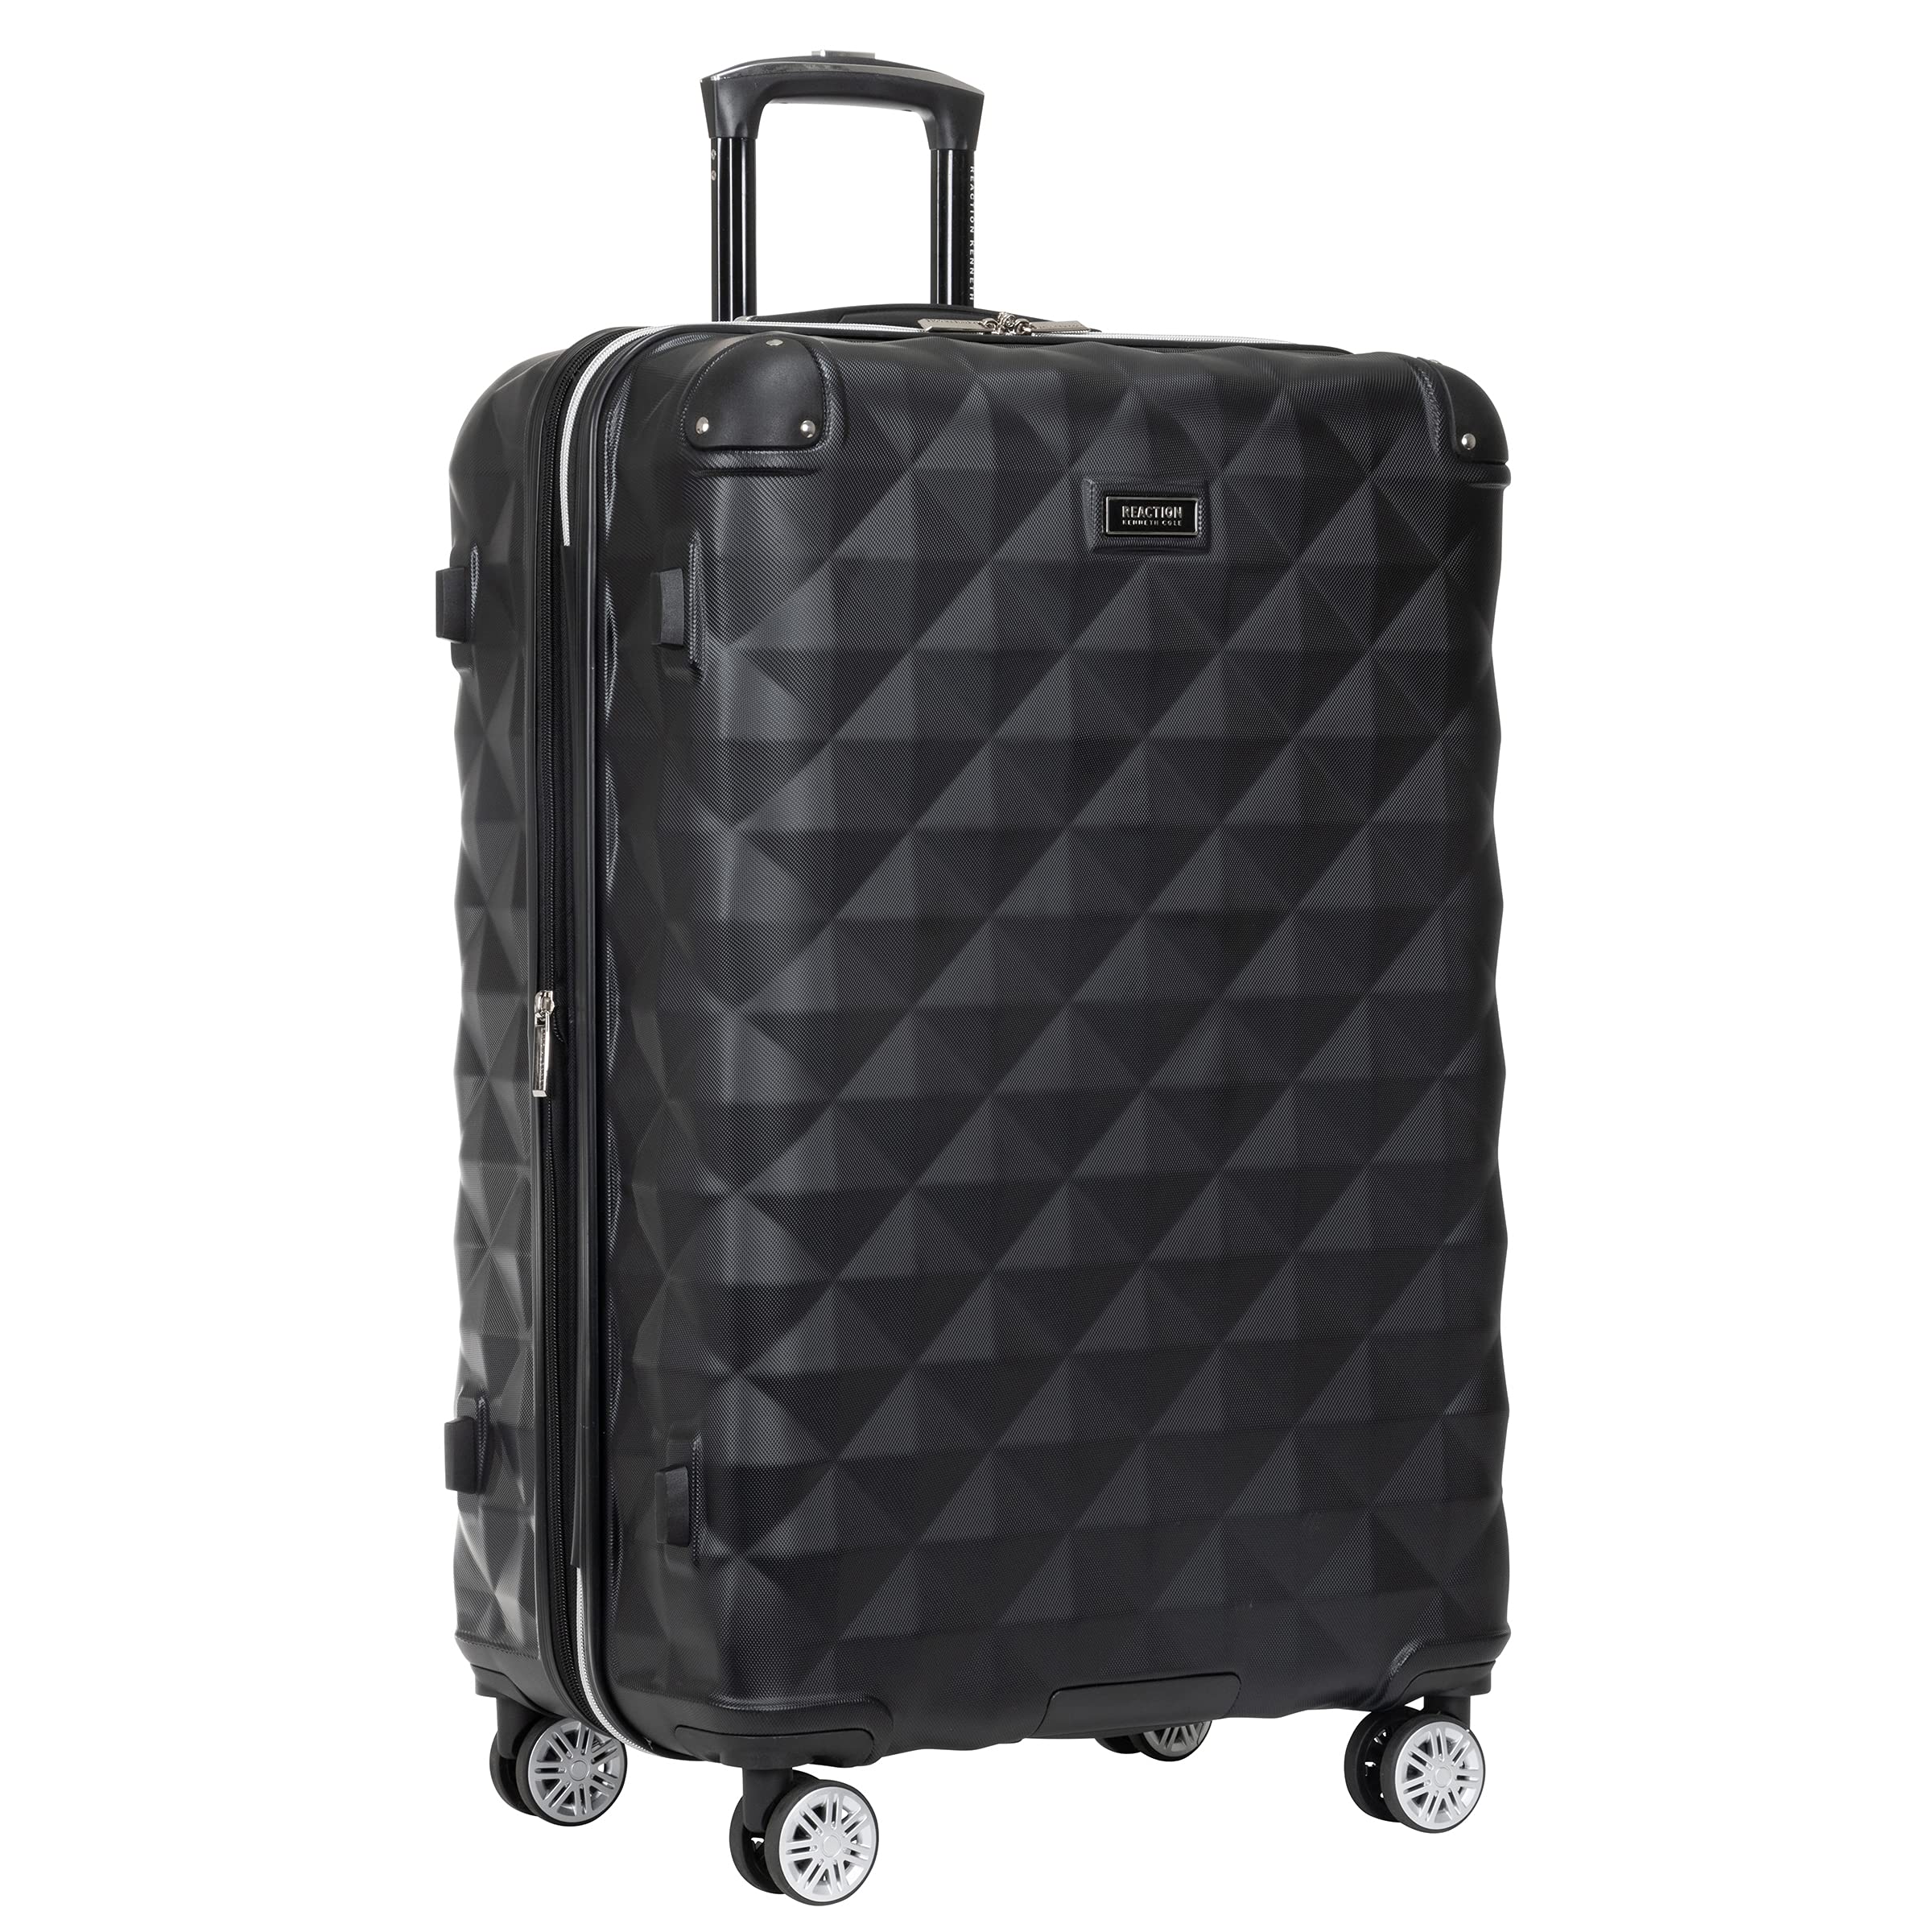 Kenneth Cole Reaction Diamond Tower Luggage Lightweight Hardside Expandable 8-Wheel Spinner Travel Suitcase, Black, 28-Inch Checked